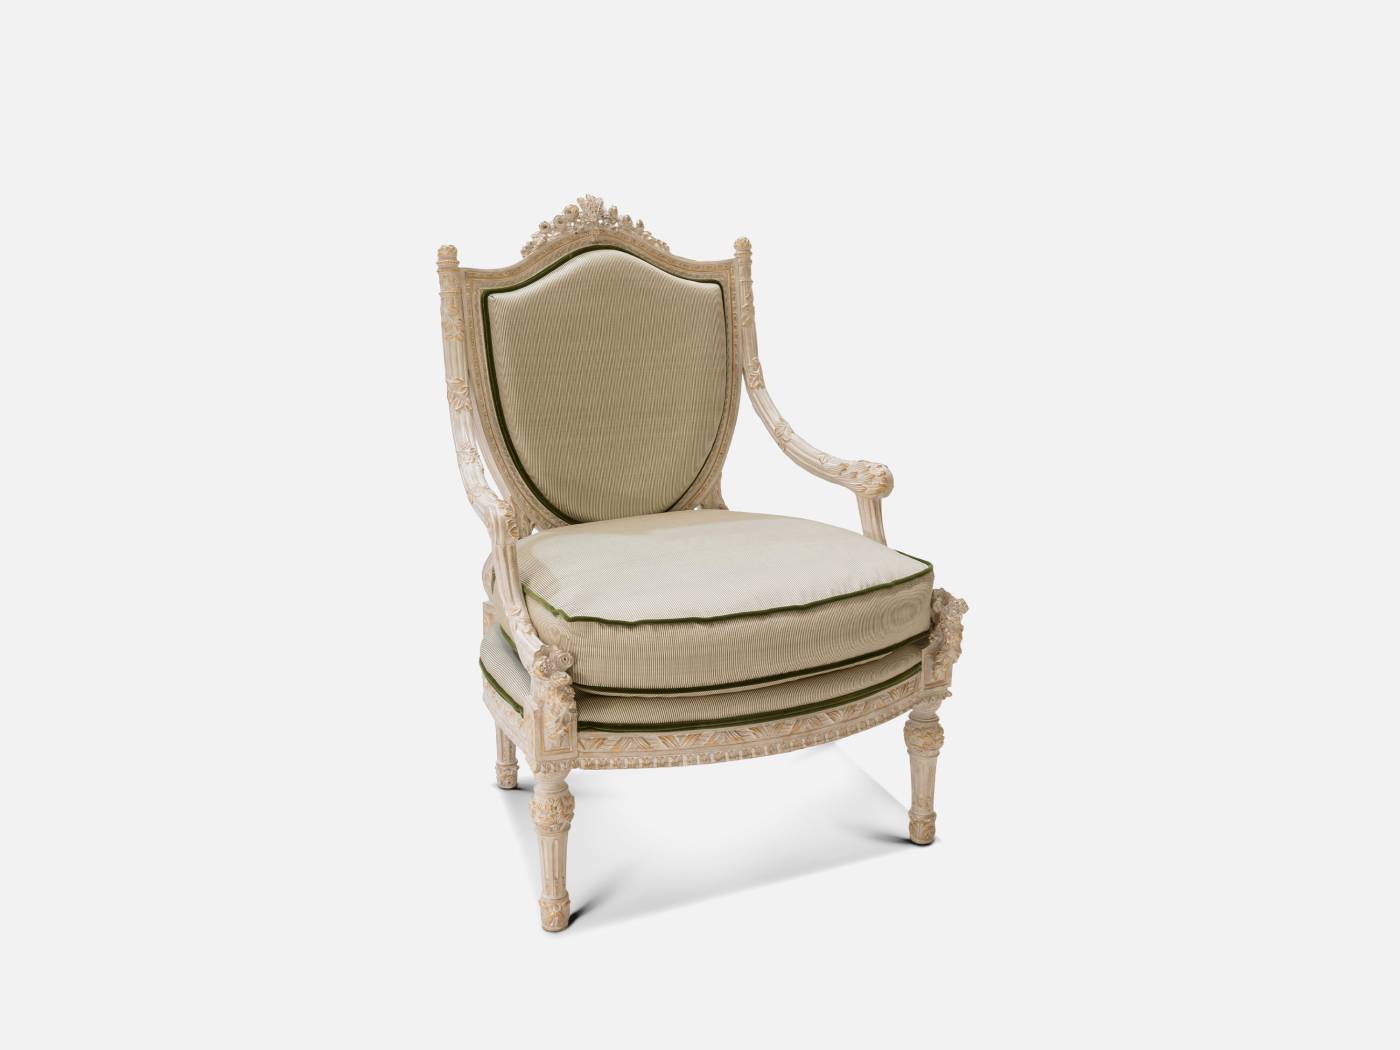 ART. 2227 - C.G. Capelletti quality furniture and timeless elegance with luxury made in italy contemporary Armchairs.